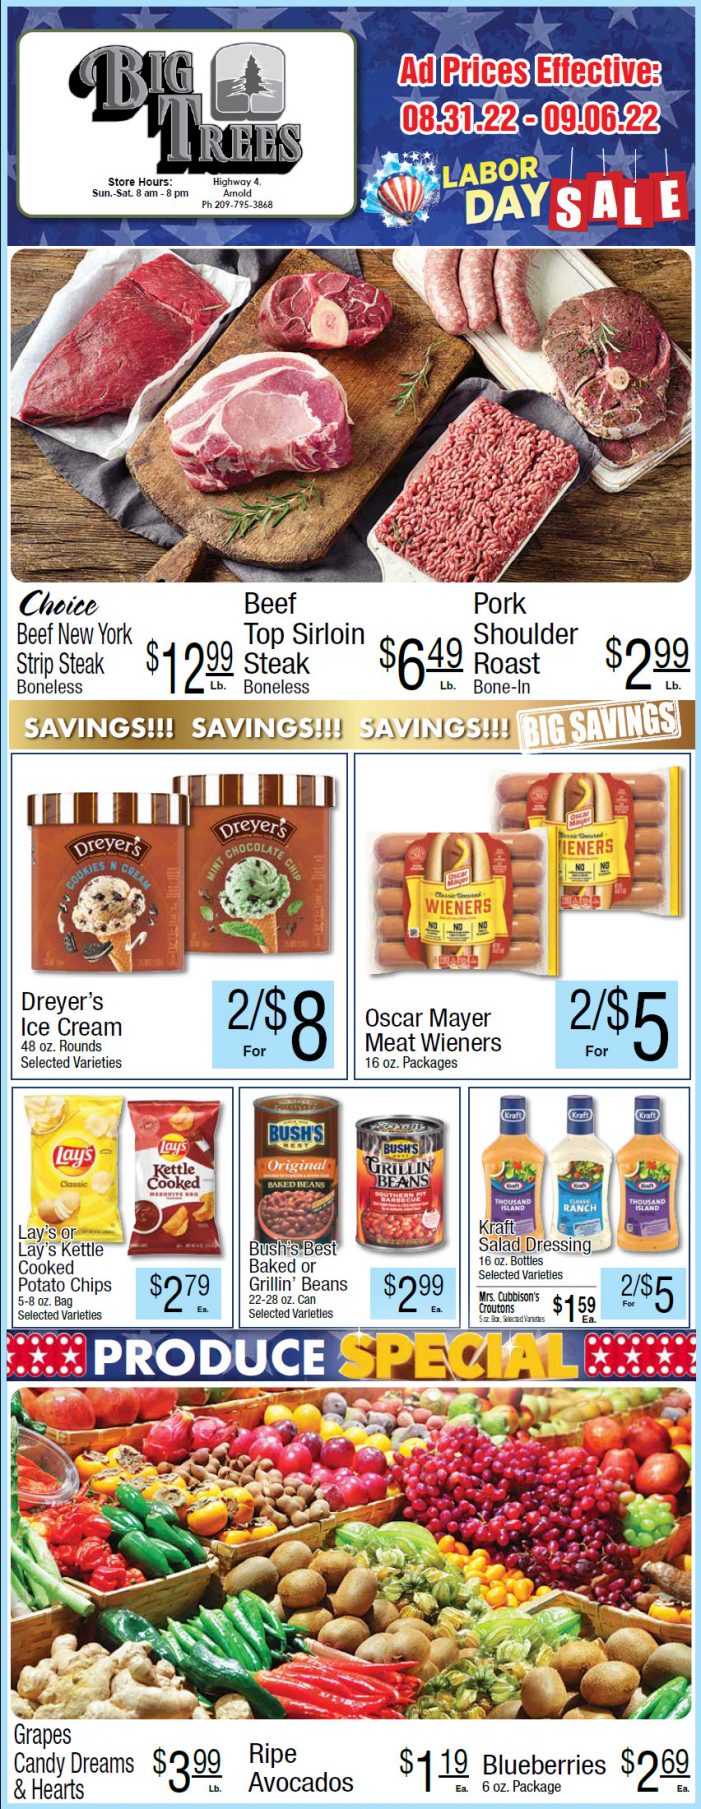 Big Trees Market Weekly Ad & Grocery Specials Through August 31 – September 6th  Shop Local & Save!!